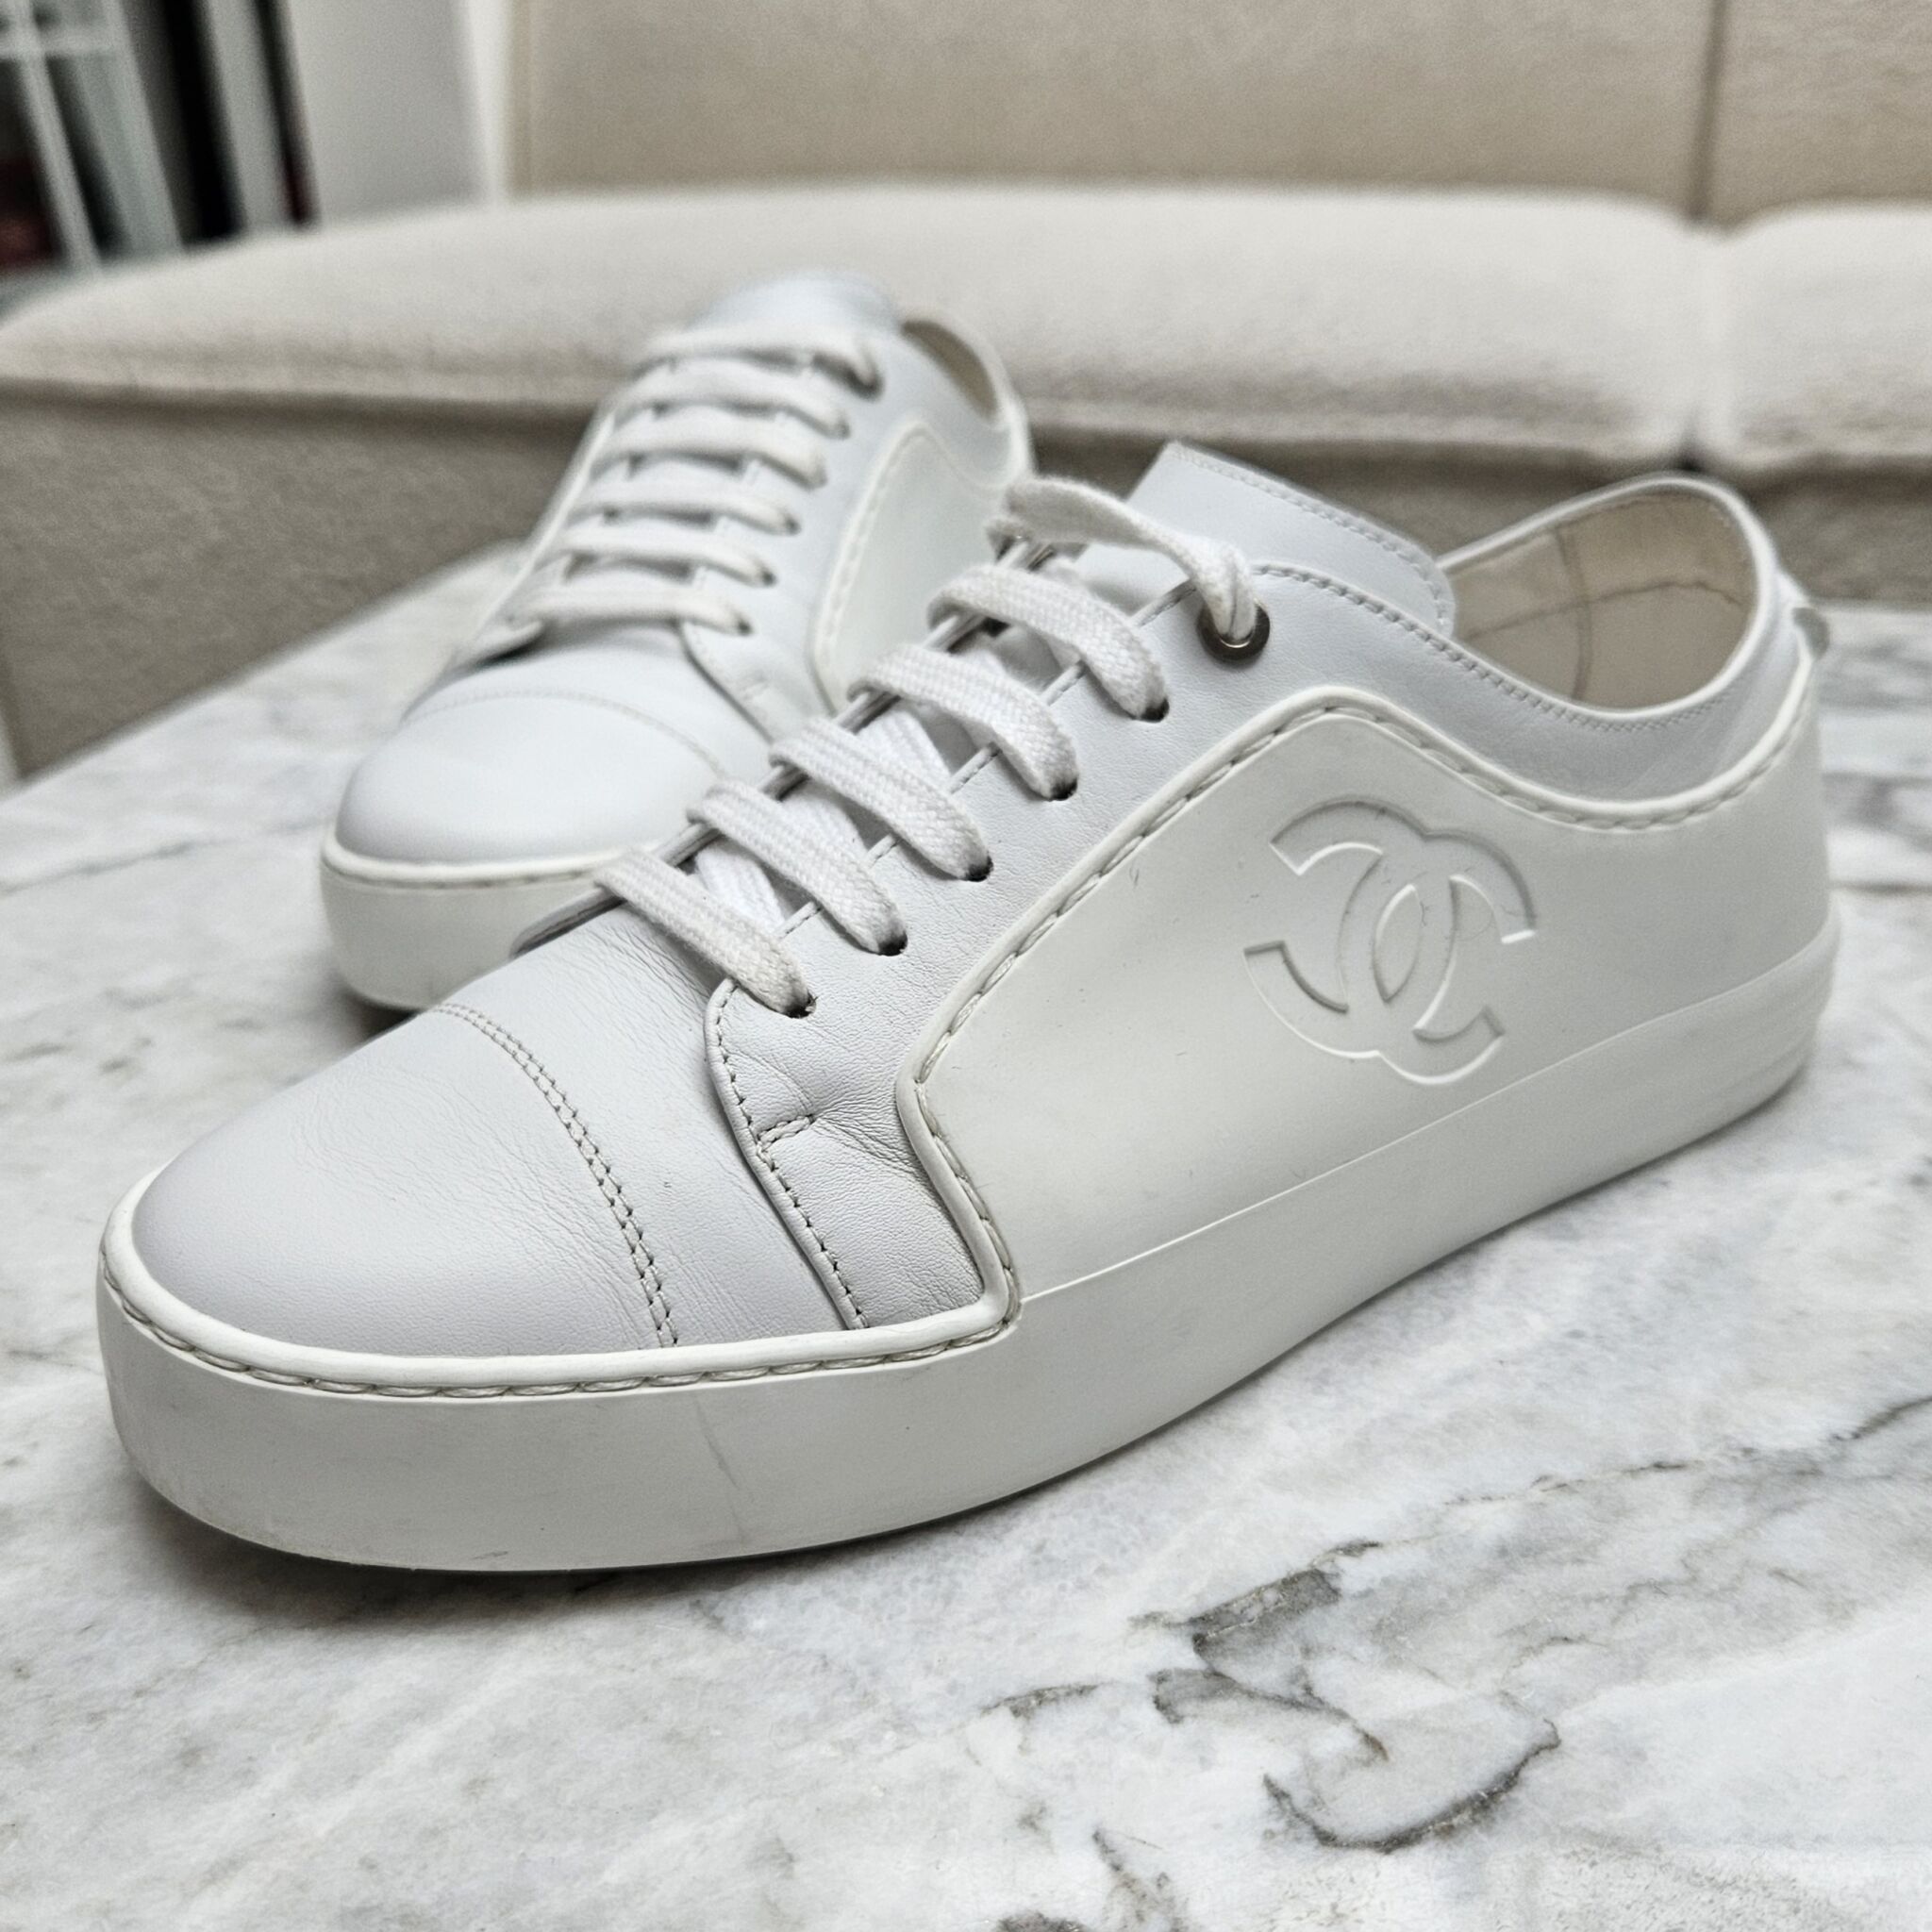 Chanel Sneakers, Leather, White 36.5 - Laulay Luxury